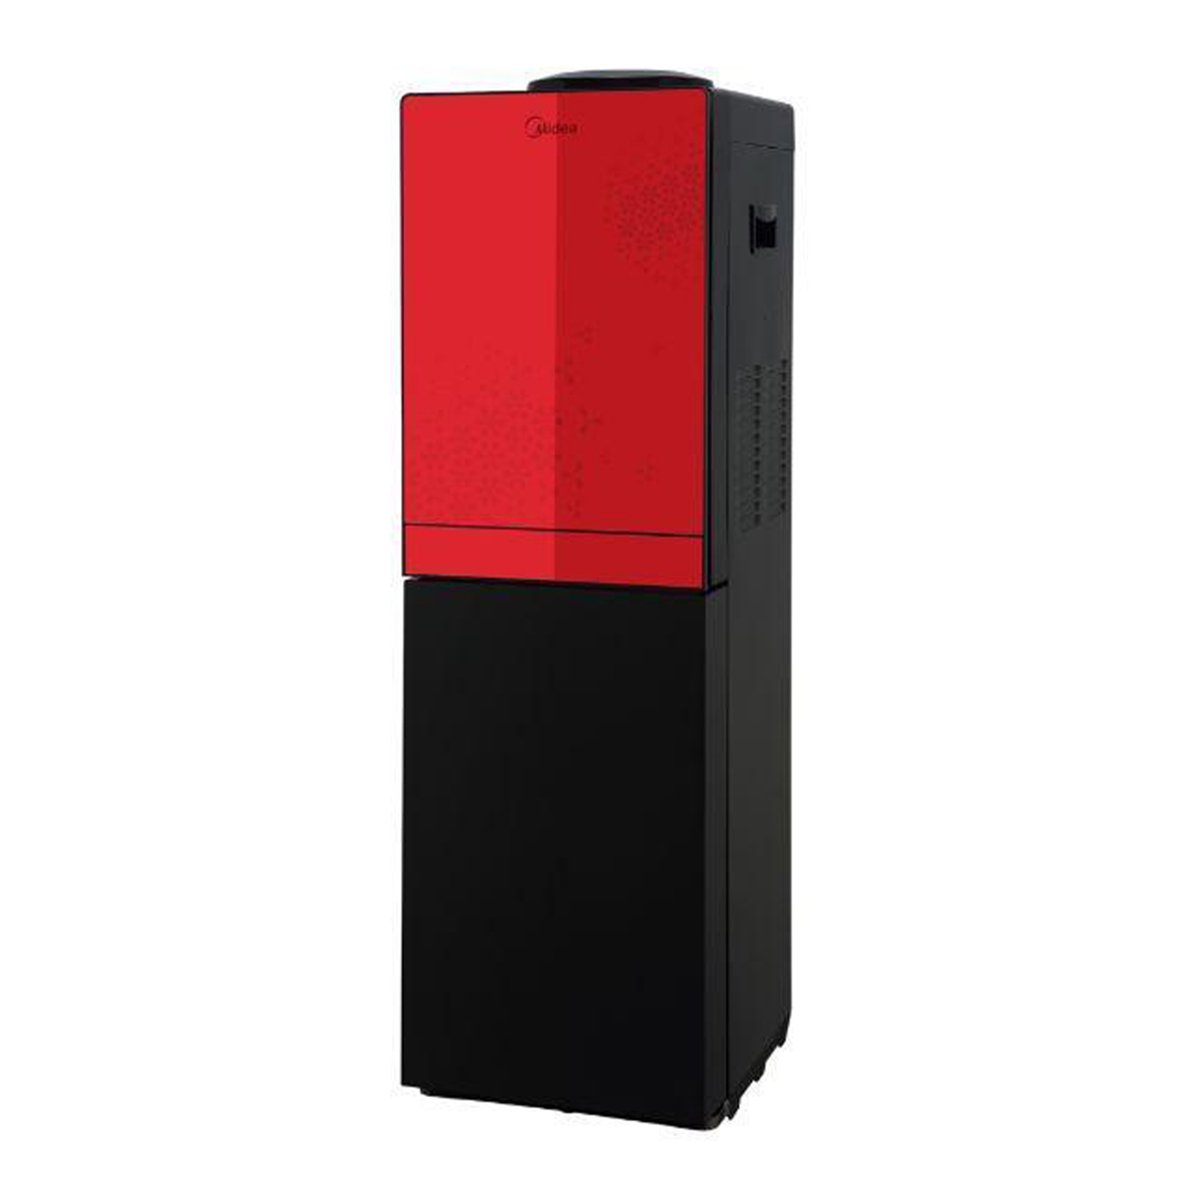 Midea Top Loading Water Dispenser YL1836S-B Red